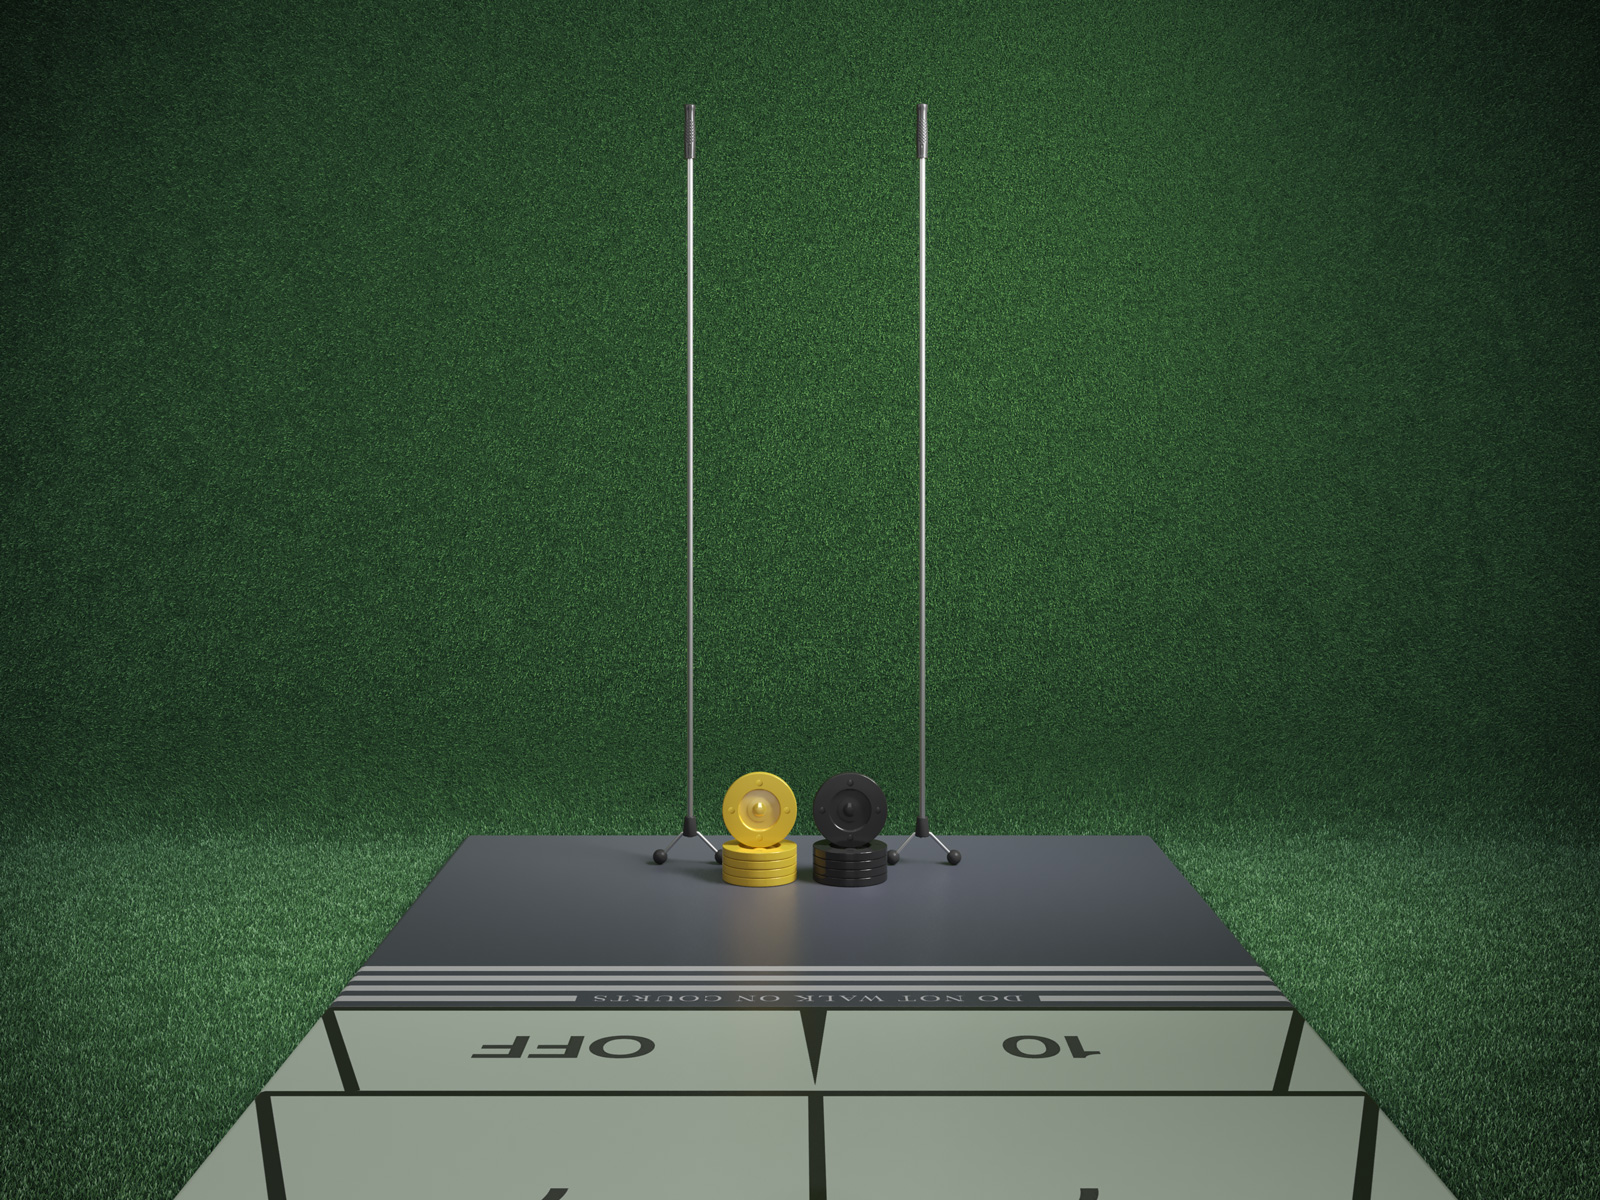 A set of gaming of equipment for the game shuffleboard. The biscuits are yellow and black in the center of the end of a shuffleboard court; the tangs are standing upright behind them.